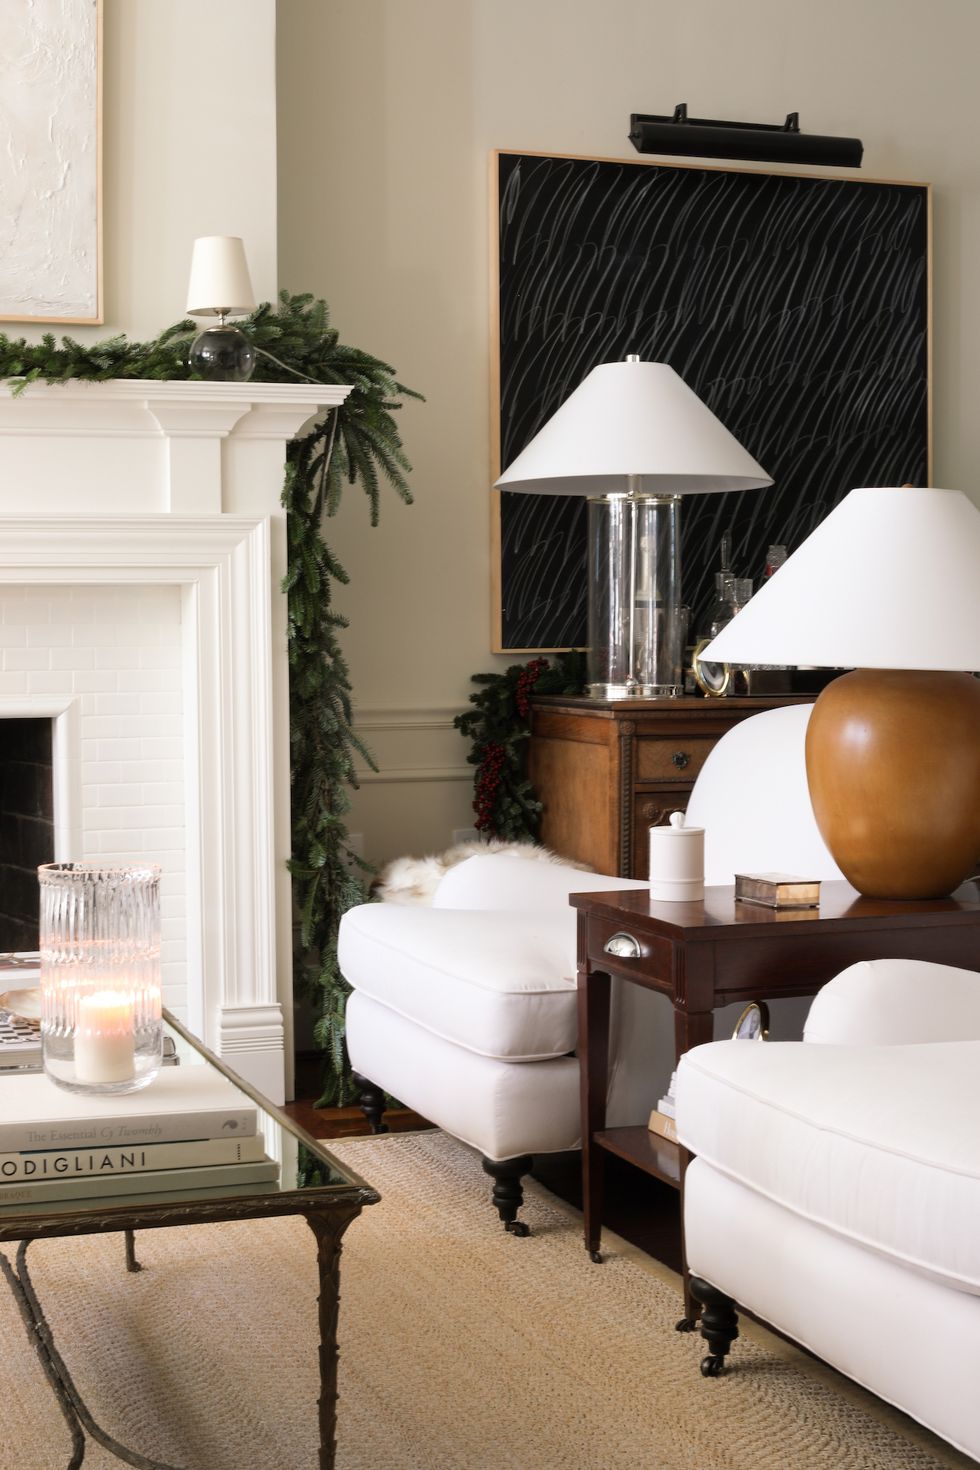 A Nostalgic Holiday Home You Don't Want to Miss | lark & linen